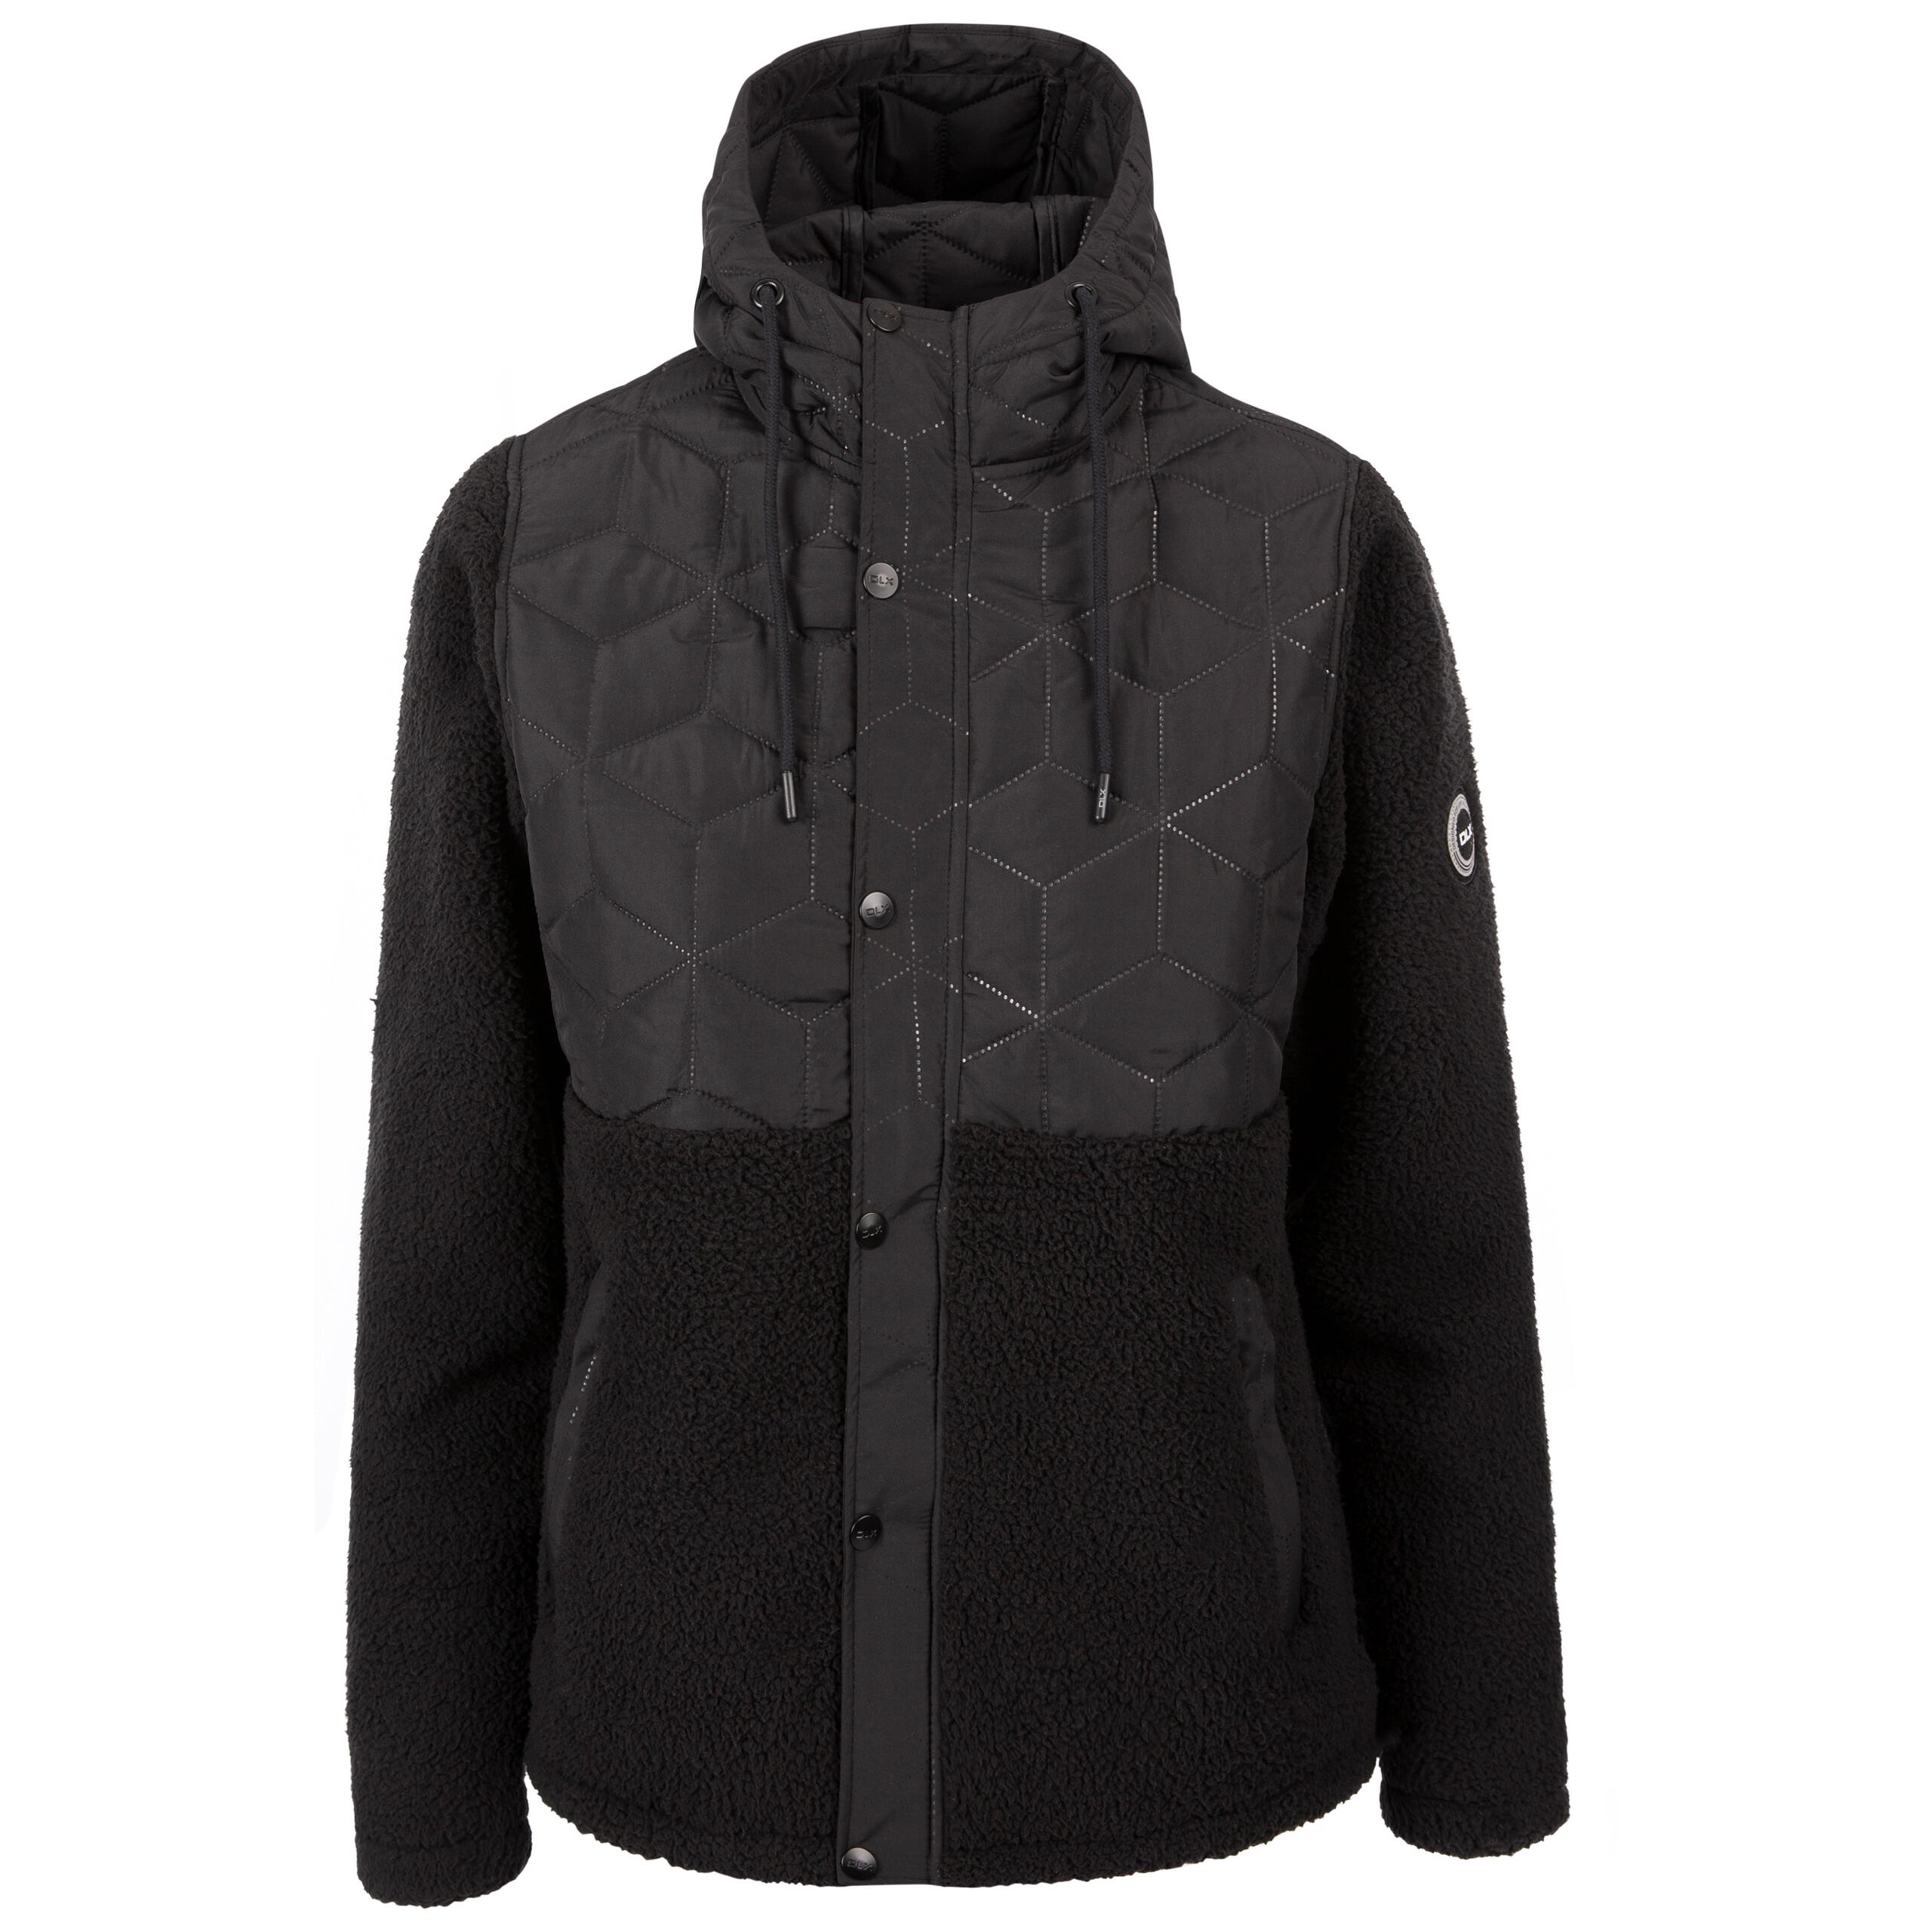 DLX Womens Hooded Fleece Jacket Quilted Panels with Full Front Zip Nicola